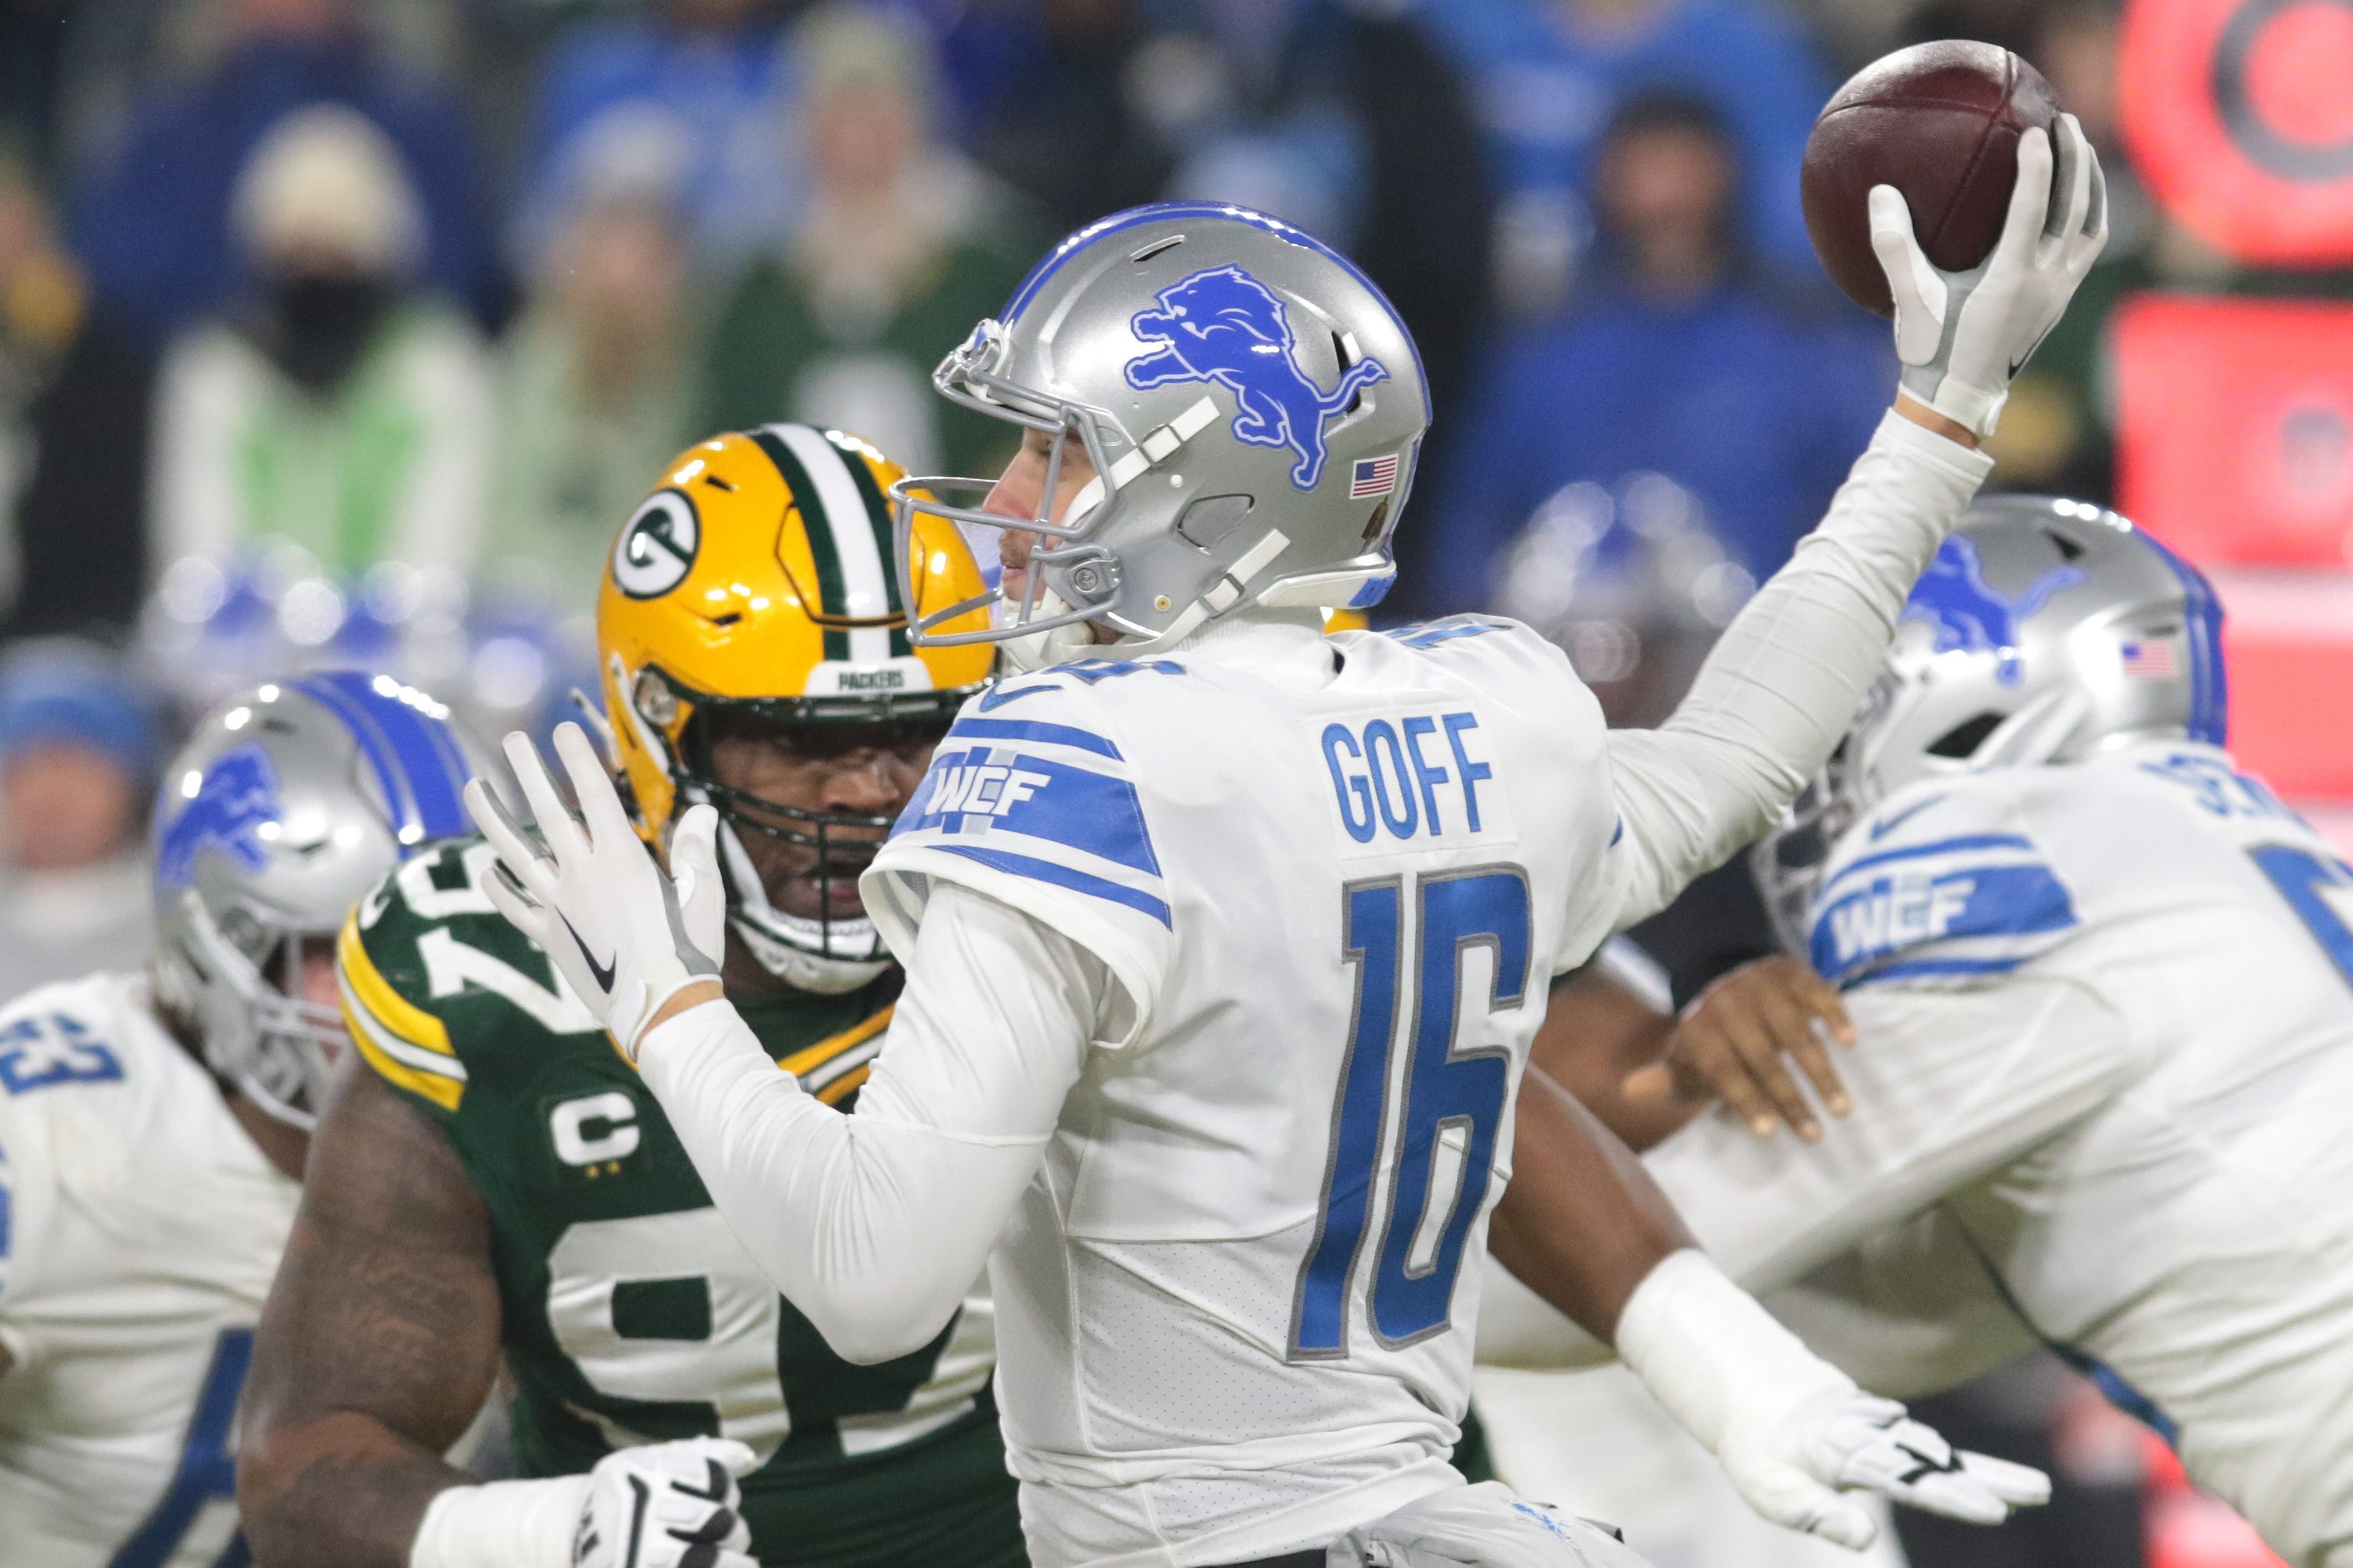 NFL Kickoff: What to Know About the NFC North and How to Bet It - InsideHook